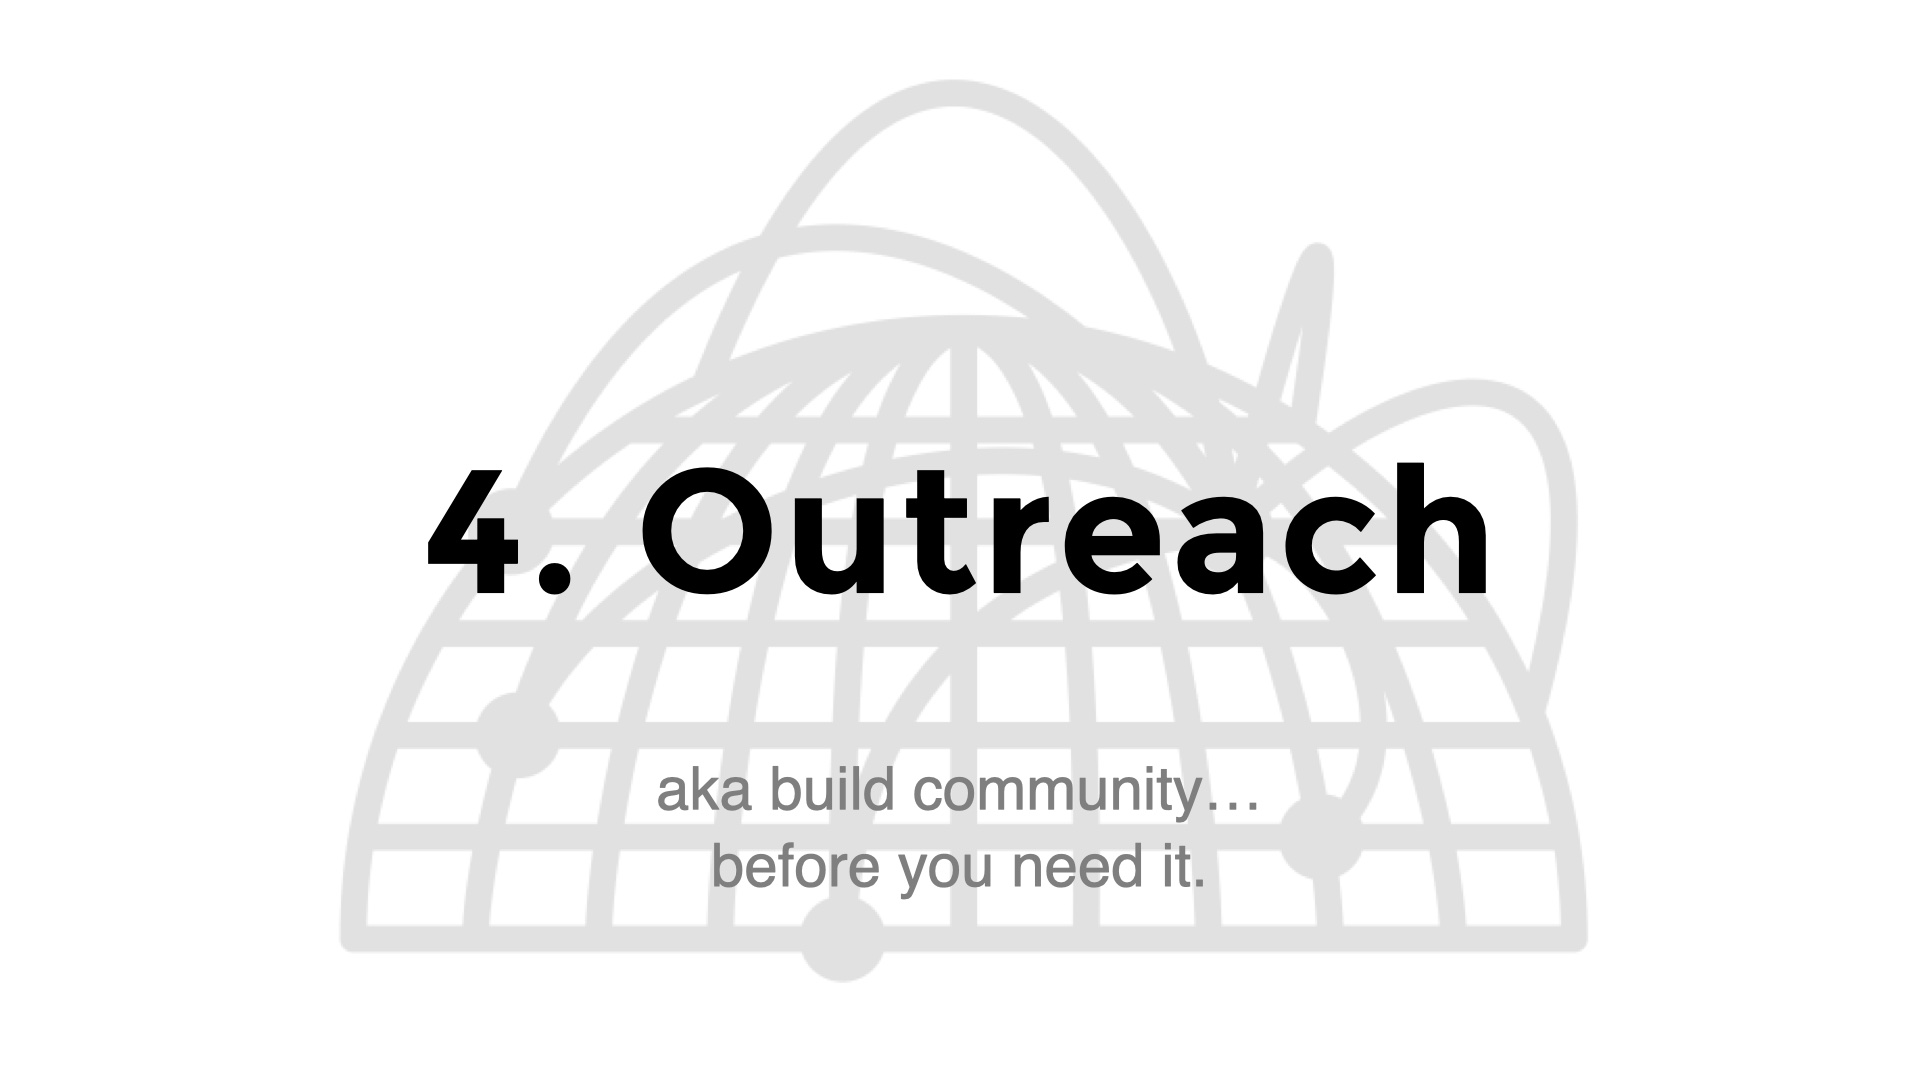 Title slide: 4. Outreach. Subtitle: aka build community...
before you need it.